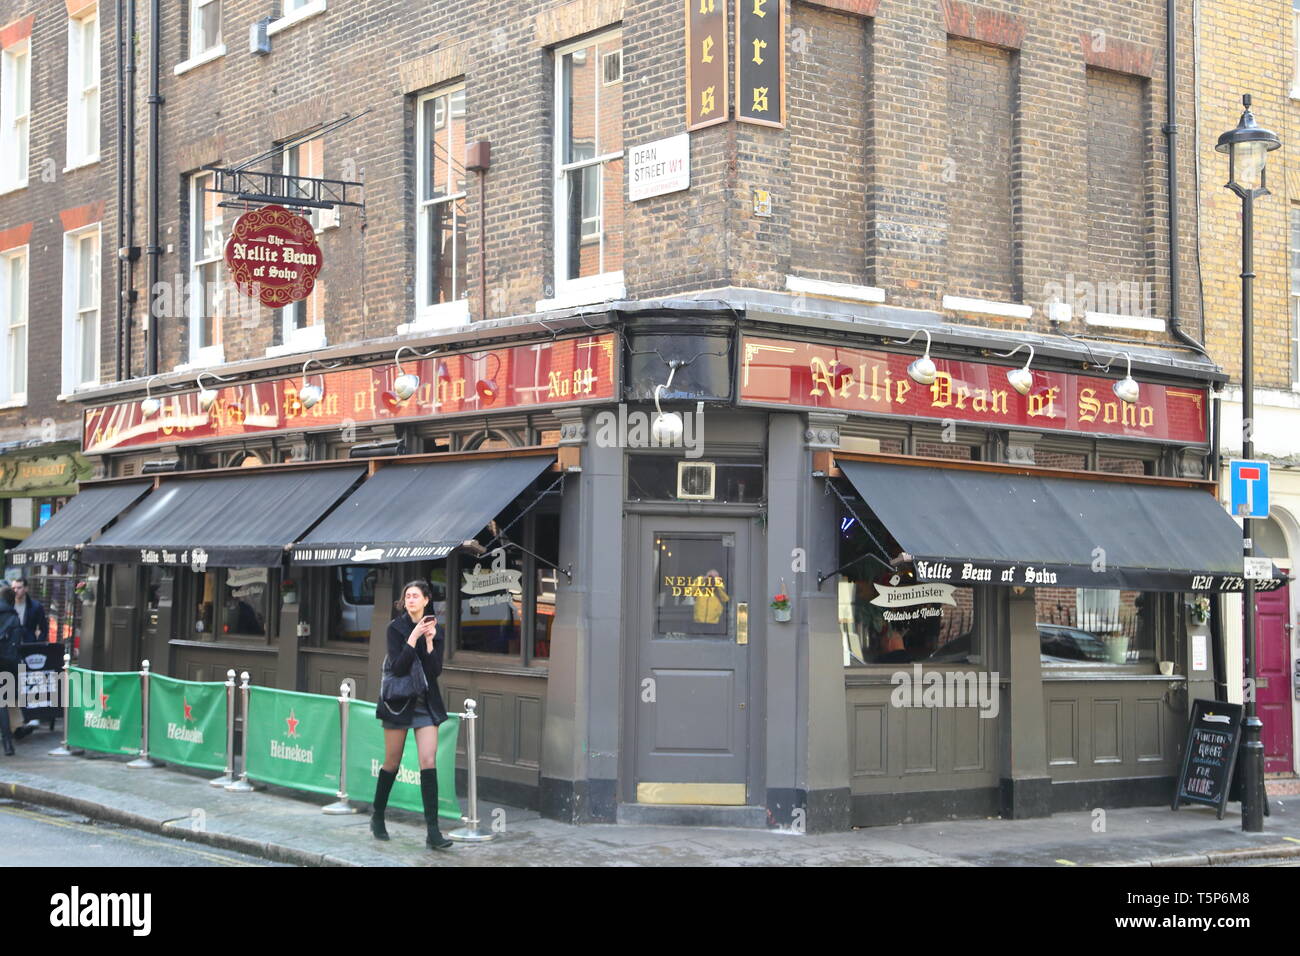 The Nellie Dean of Soho, a traditional pub, in Soho, London, UK Stock Photo